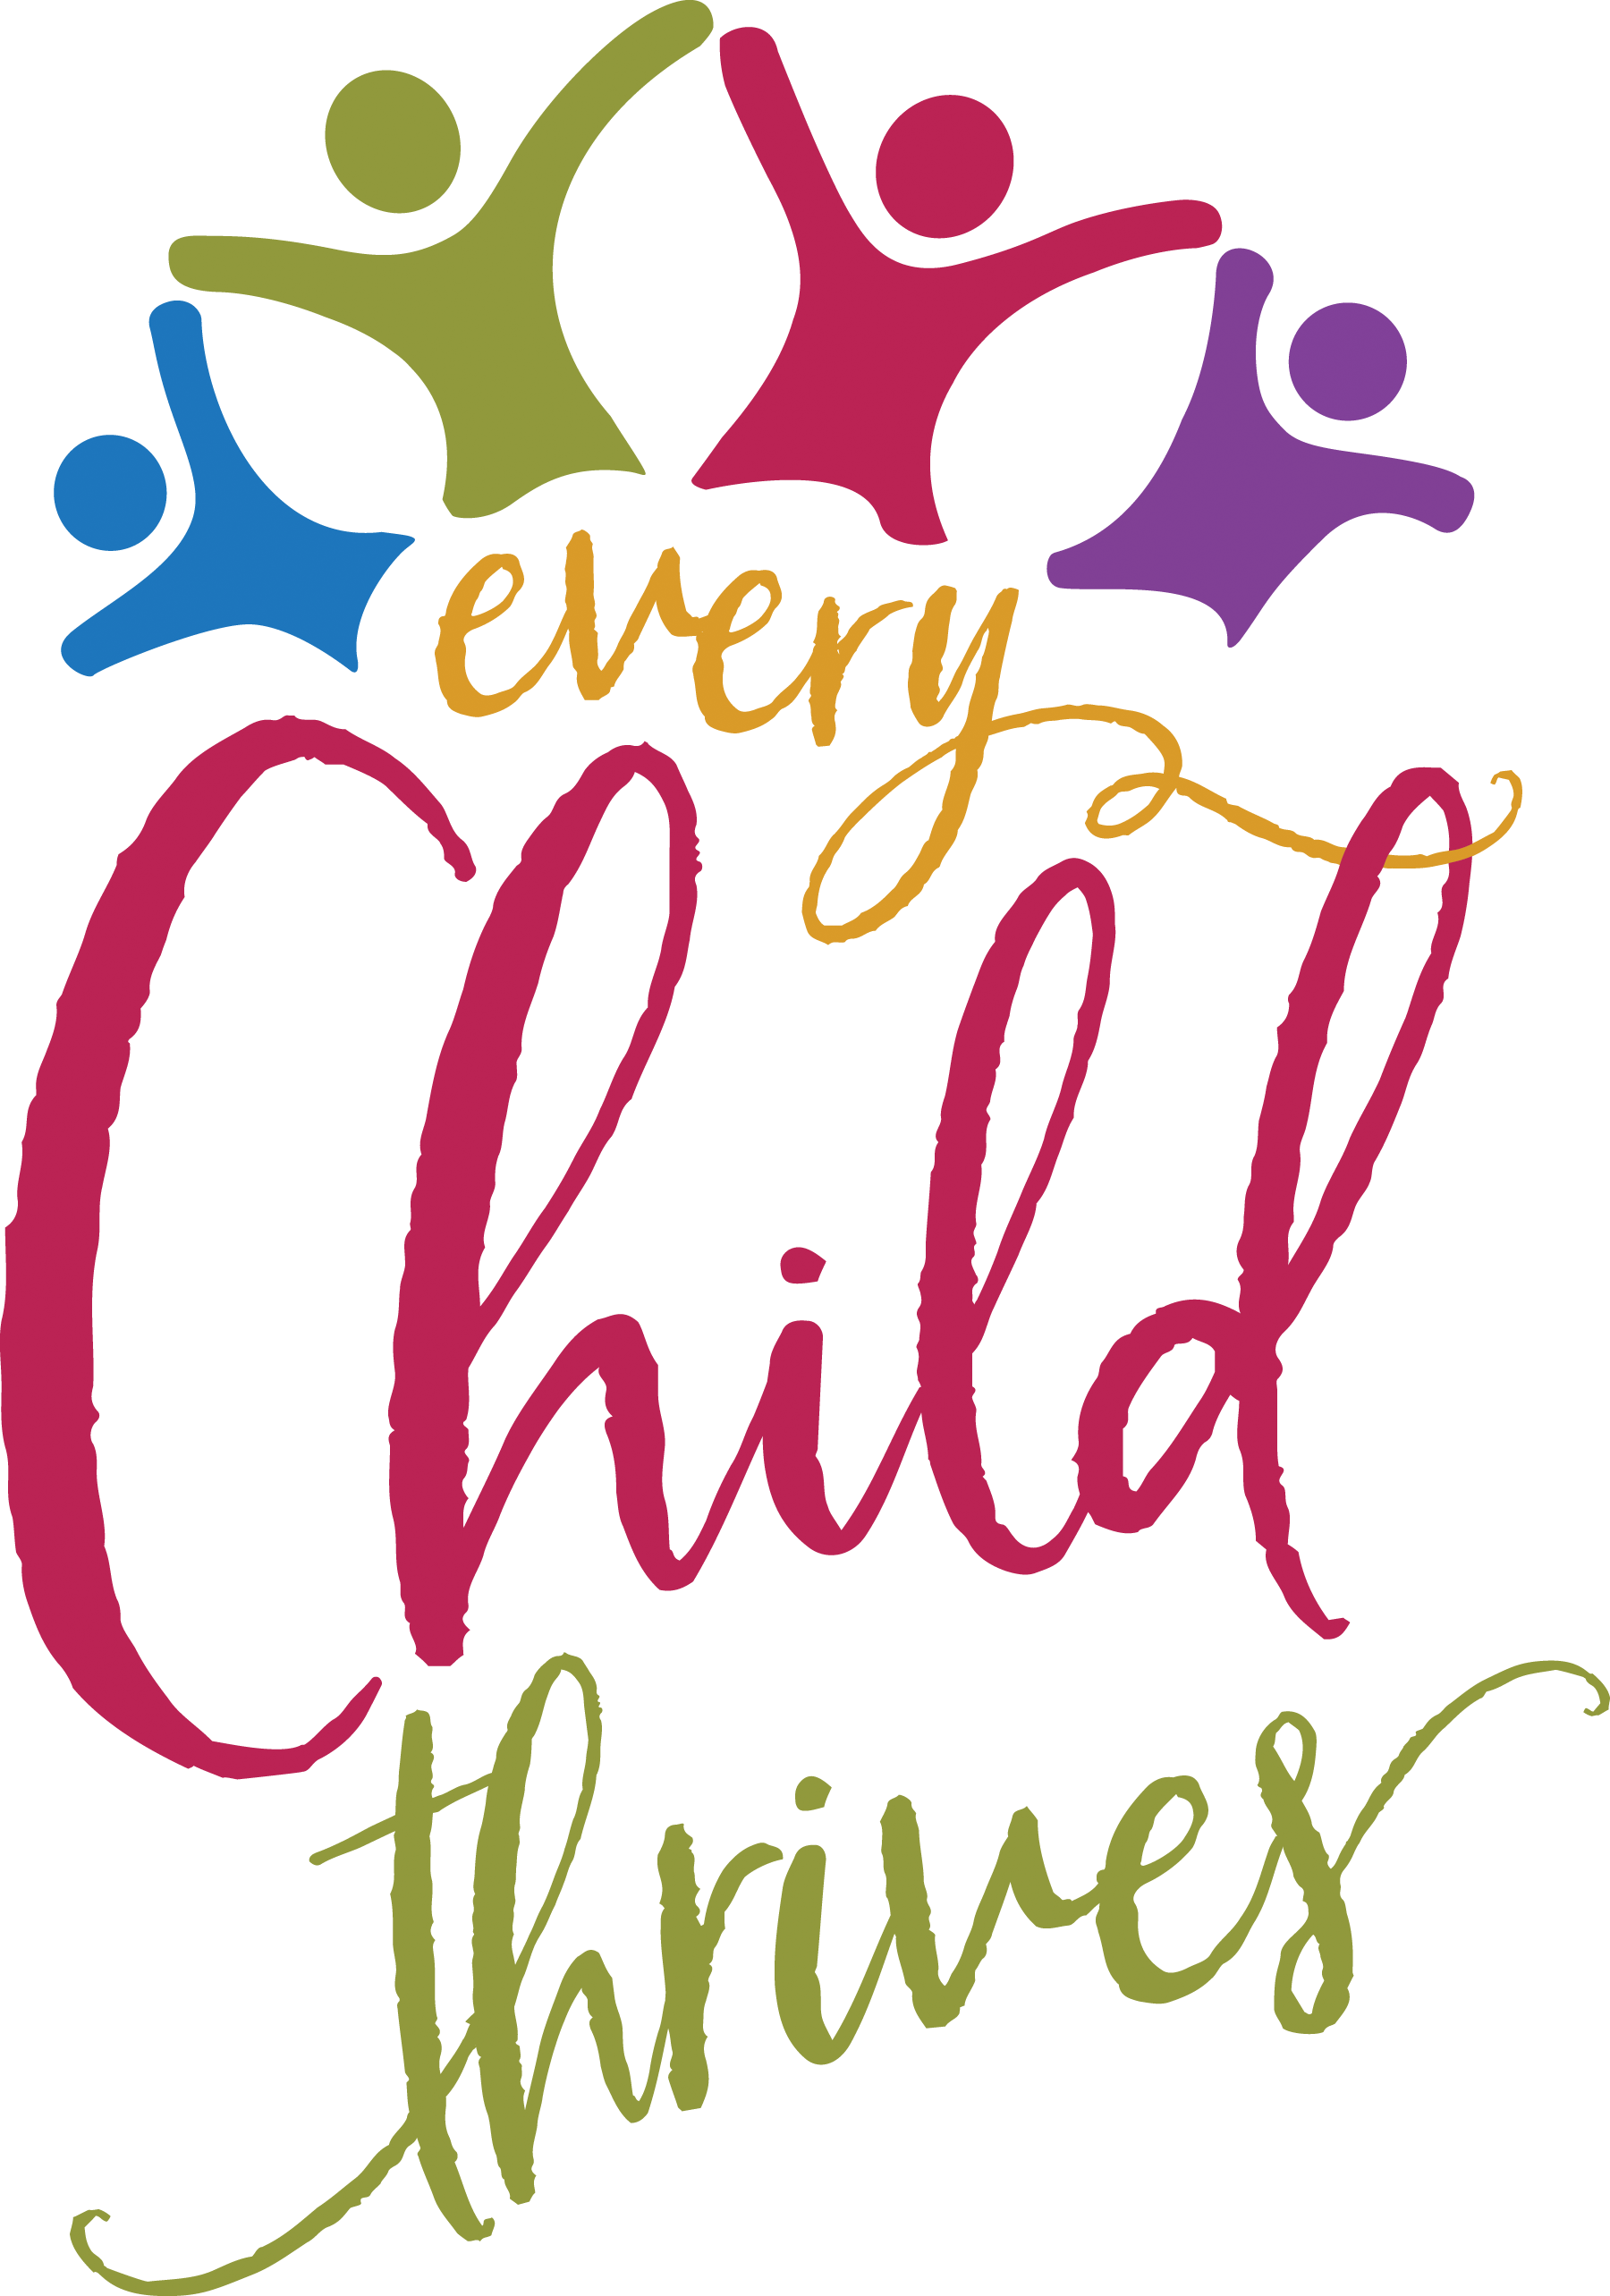 Every Child Thrives